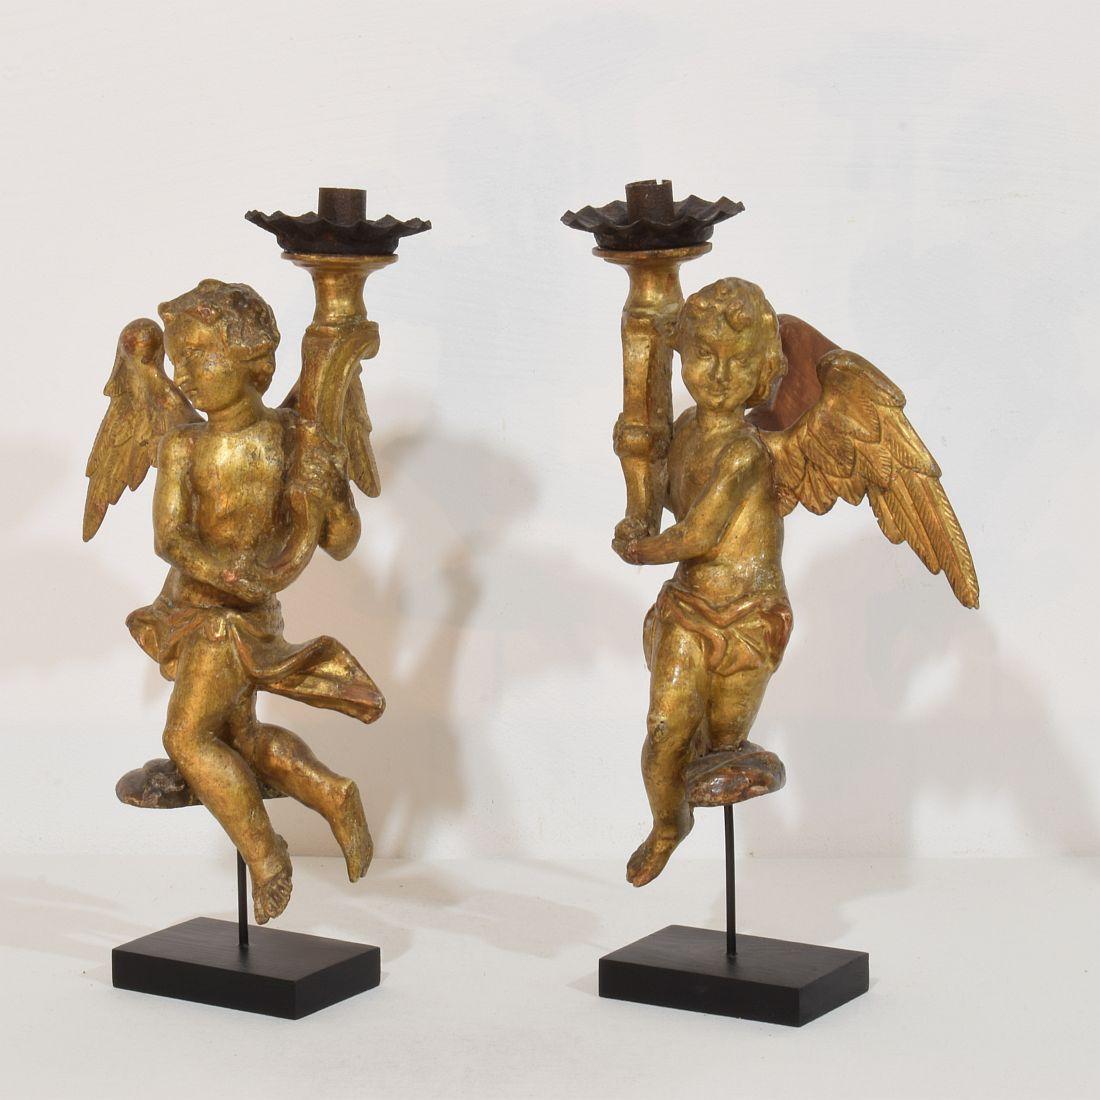 Hand-Carved Pair of 18th Century Italian Baroque Angels with Candleholders